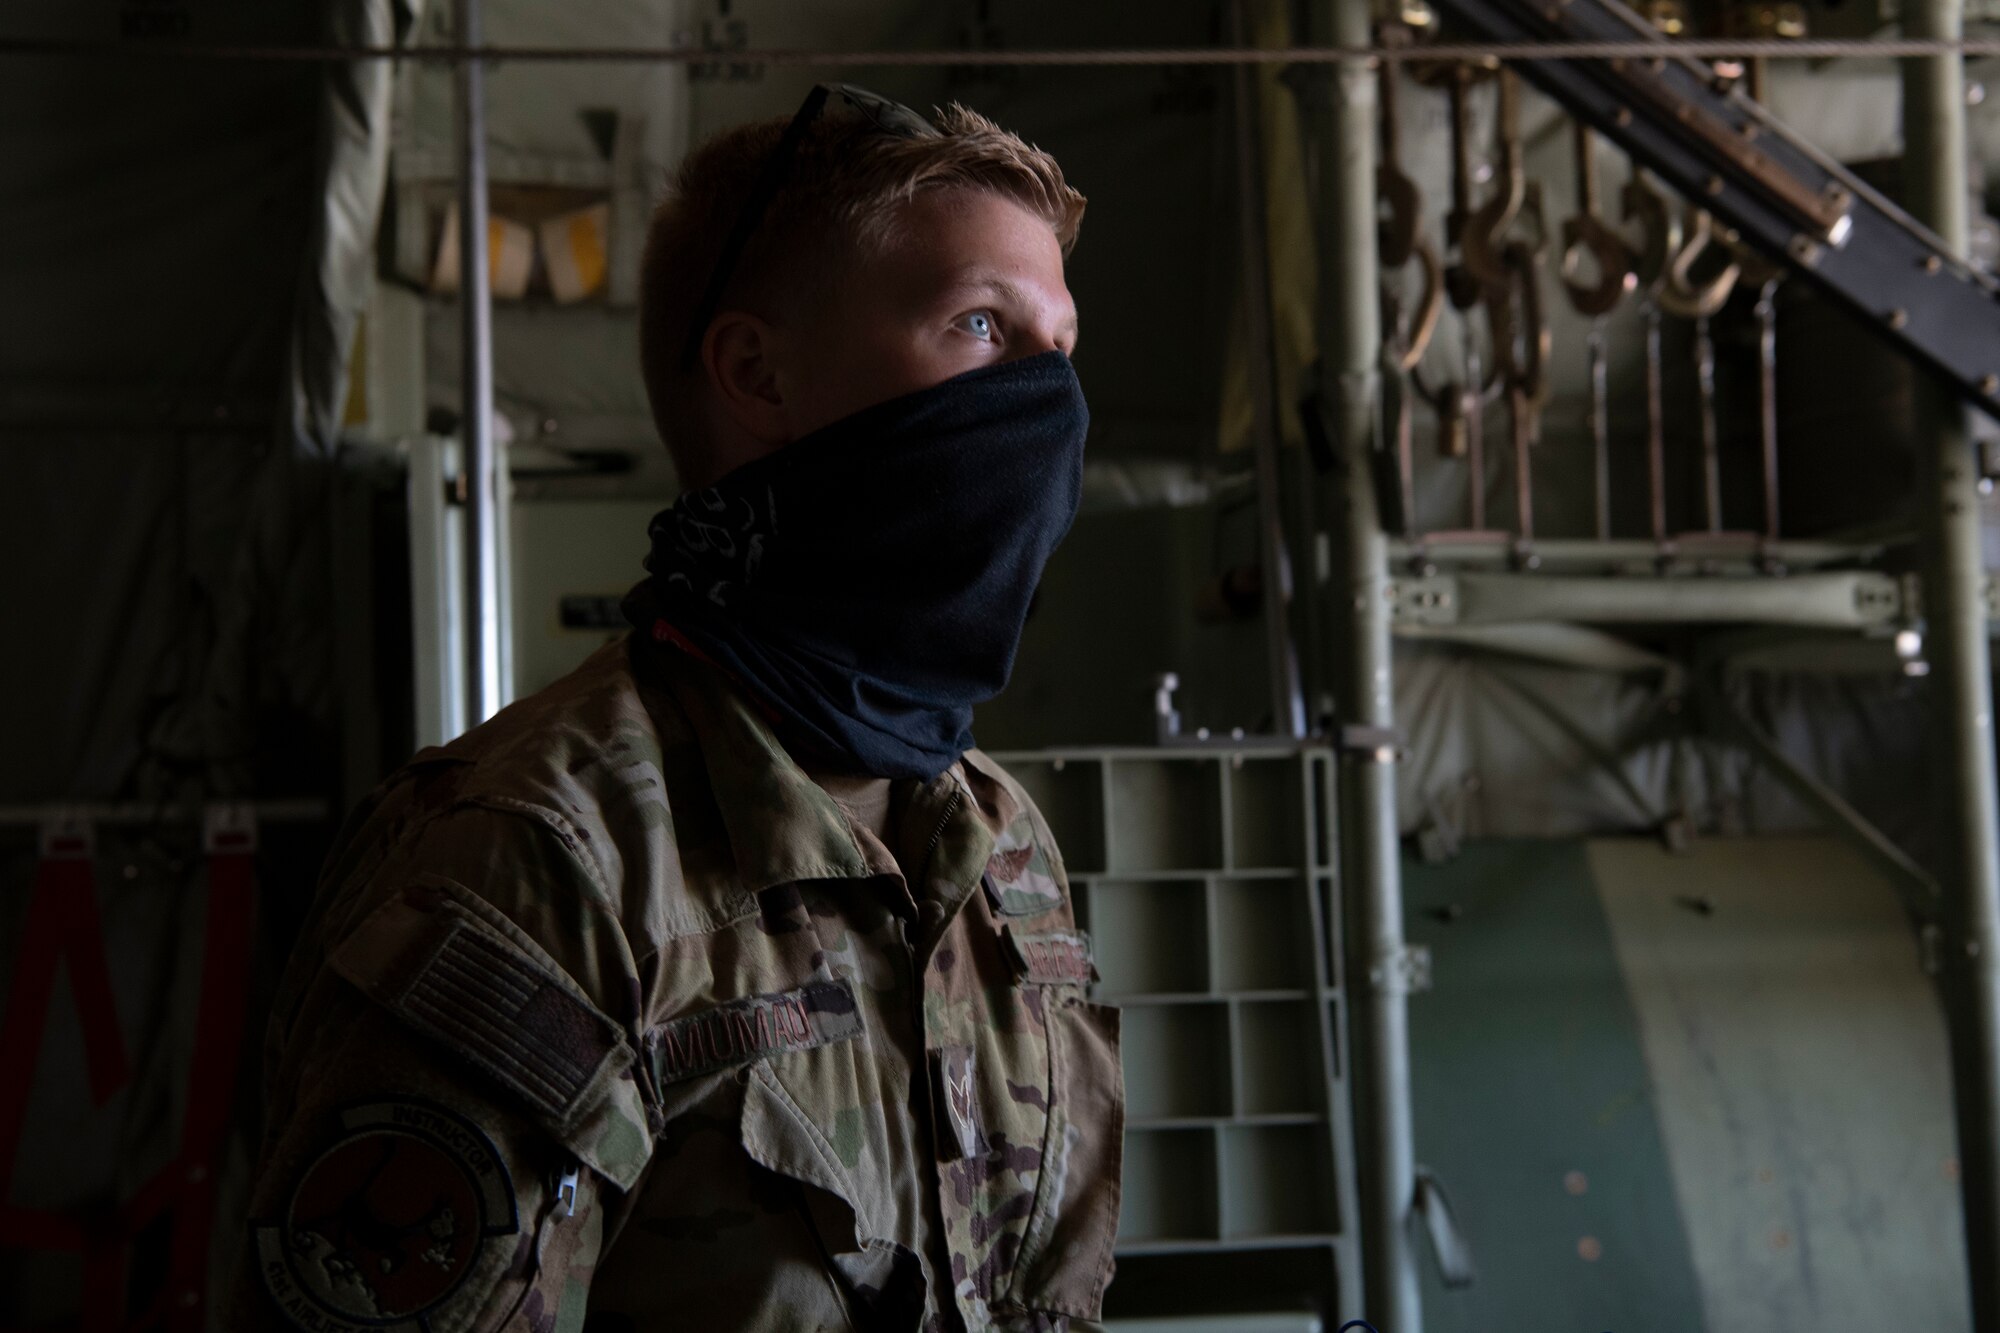 Senior Airman Kirk Mumau, 41st Airlift Squadron loadmaster, prepares a C-130J Super Hercules for flight during pre-deployment training at Montrose Regional Airport, Colorado, July 27, 2020. This training is part of the 4/12 deployment initiative, which was developed in 2019 between airlift squadrons from Dyess Air Force Base, Texas and Little Rock AFB, allowing each squadron a full year of dwell time followed by a four-month rotation to their respective area of responsibility. (U.S. Air Force photo by Airman 1st Class Aaron Irvin)